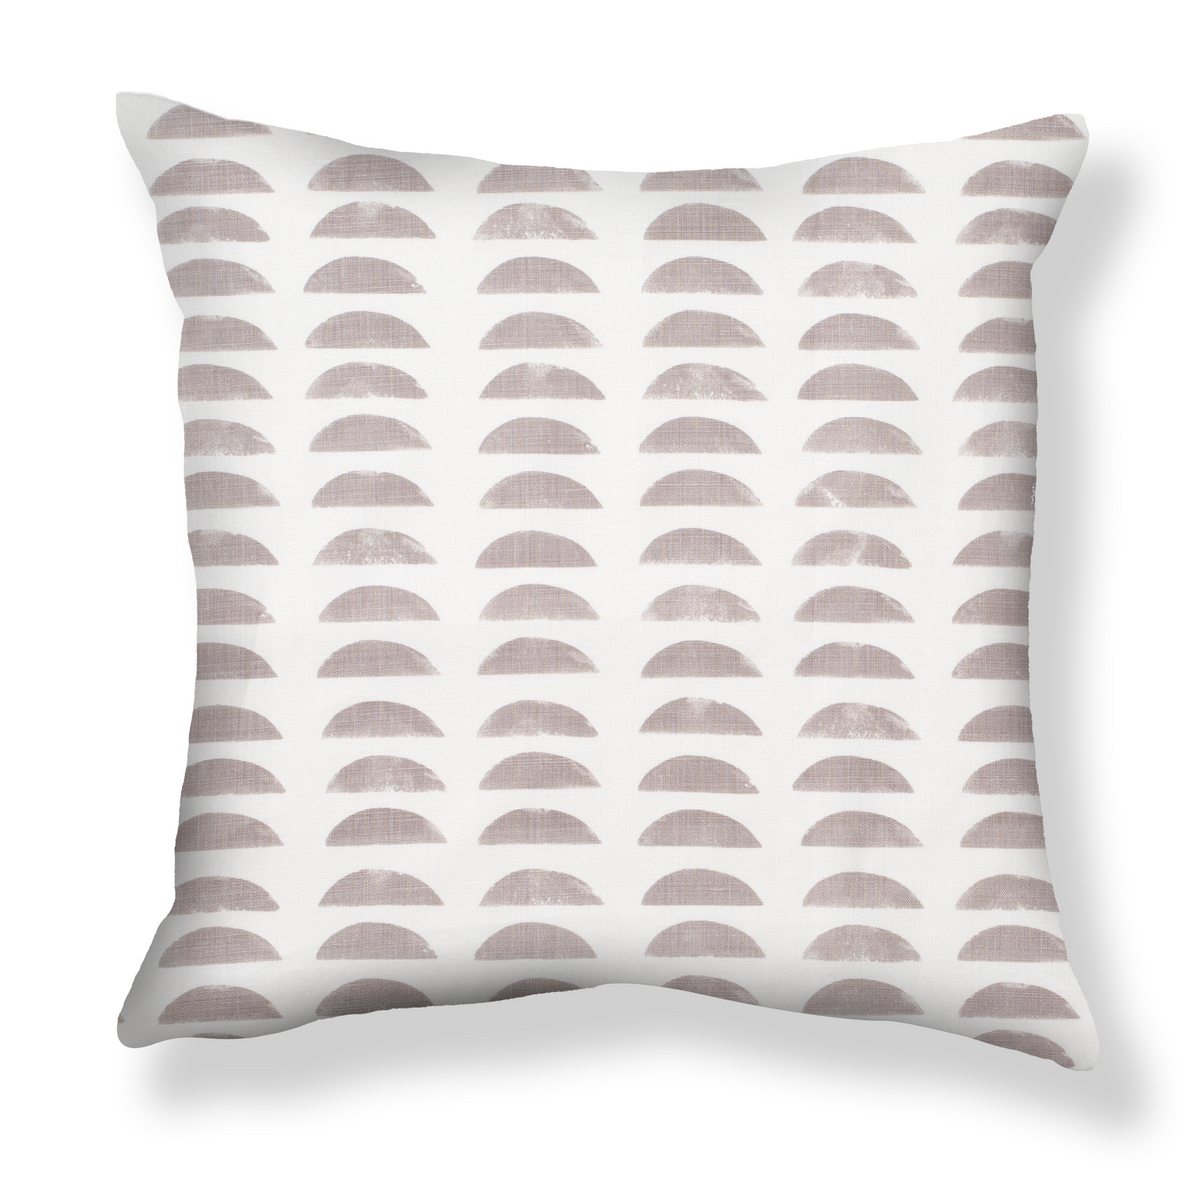 Hills Pillow in Gray-Wood